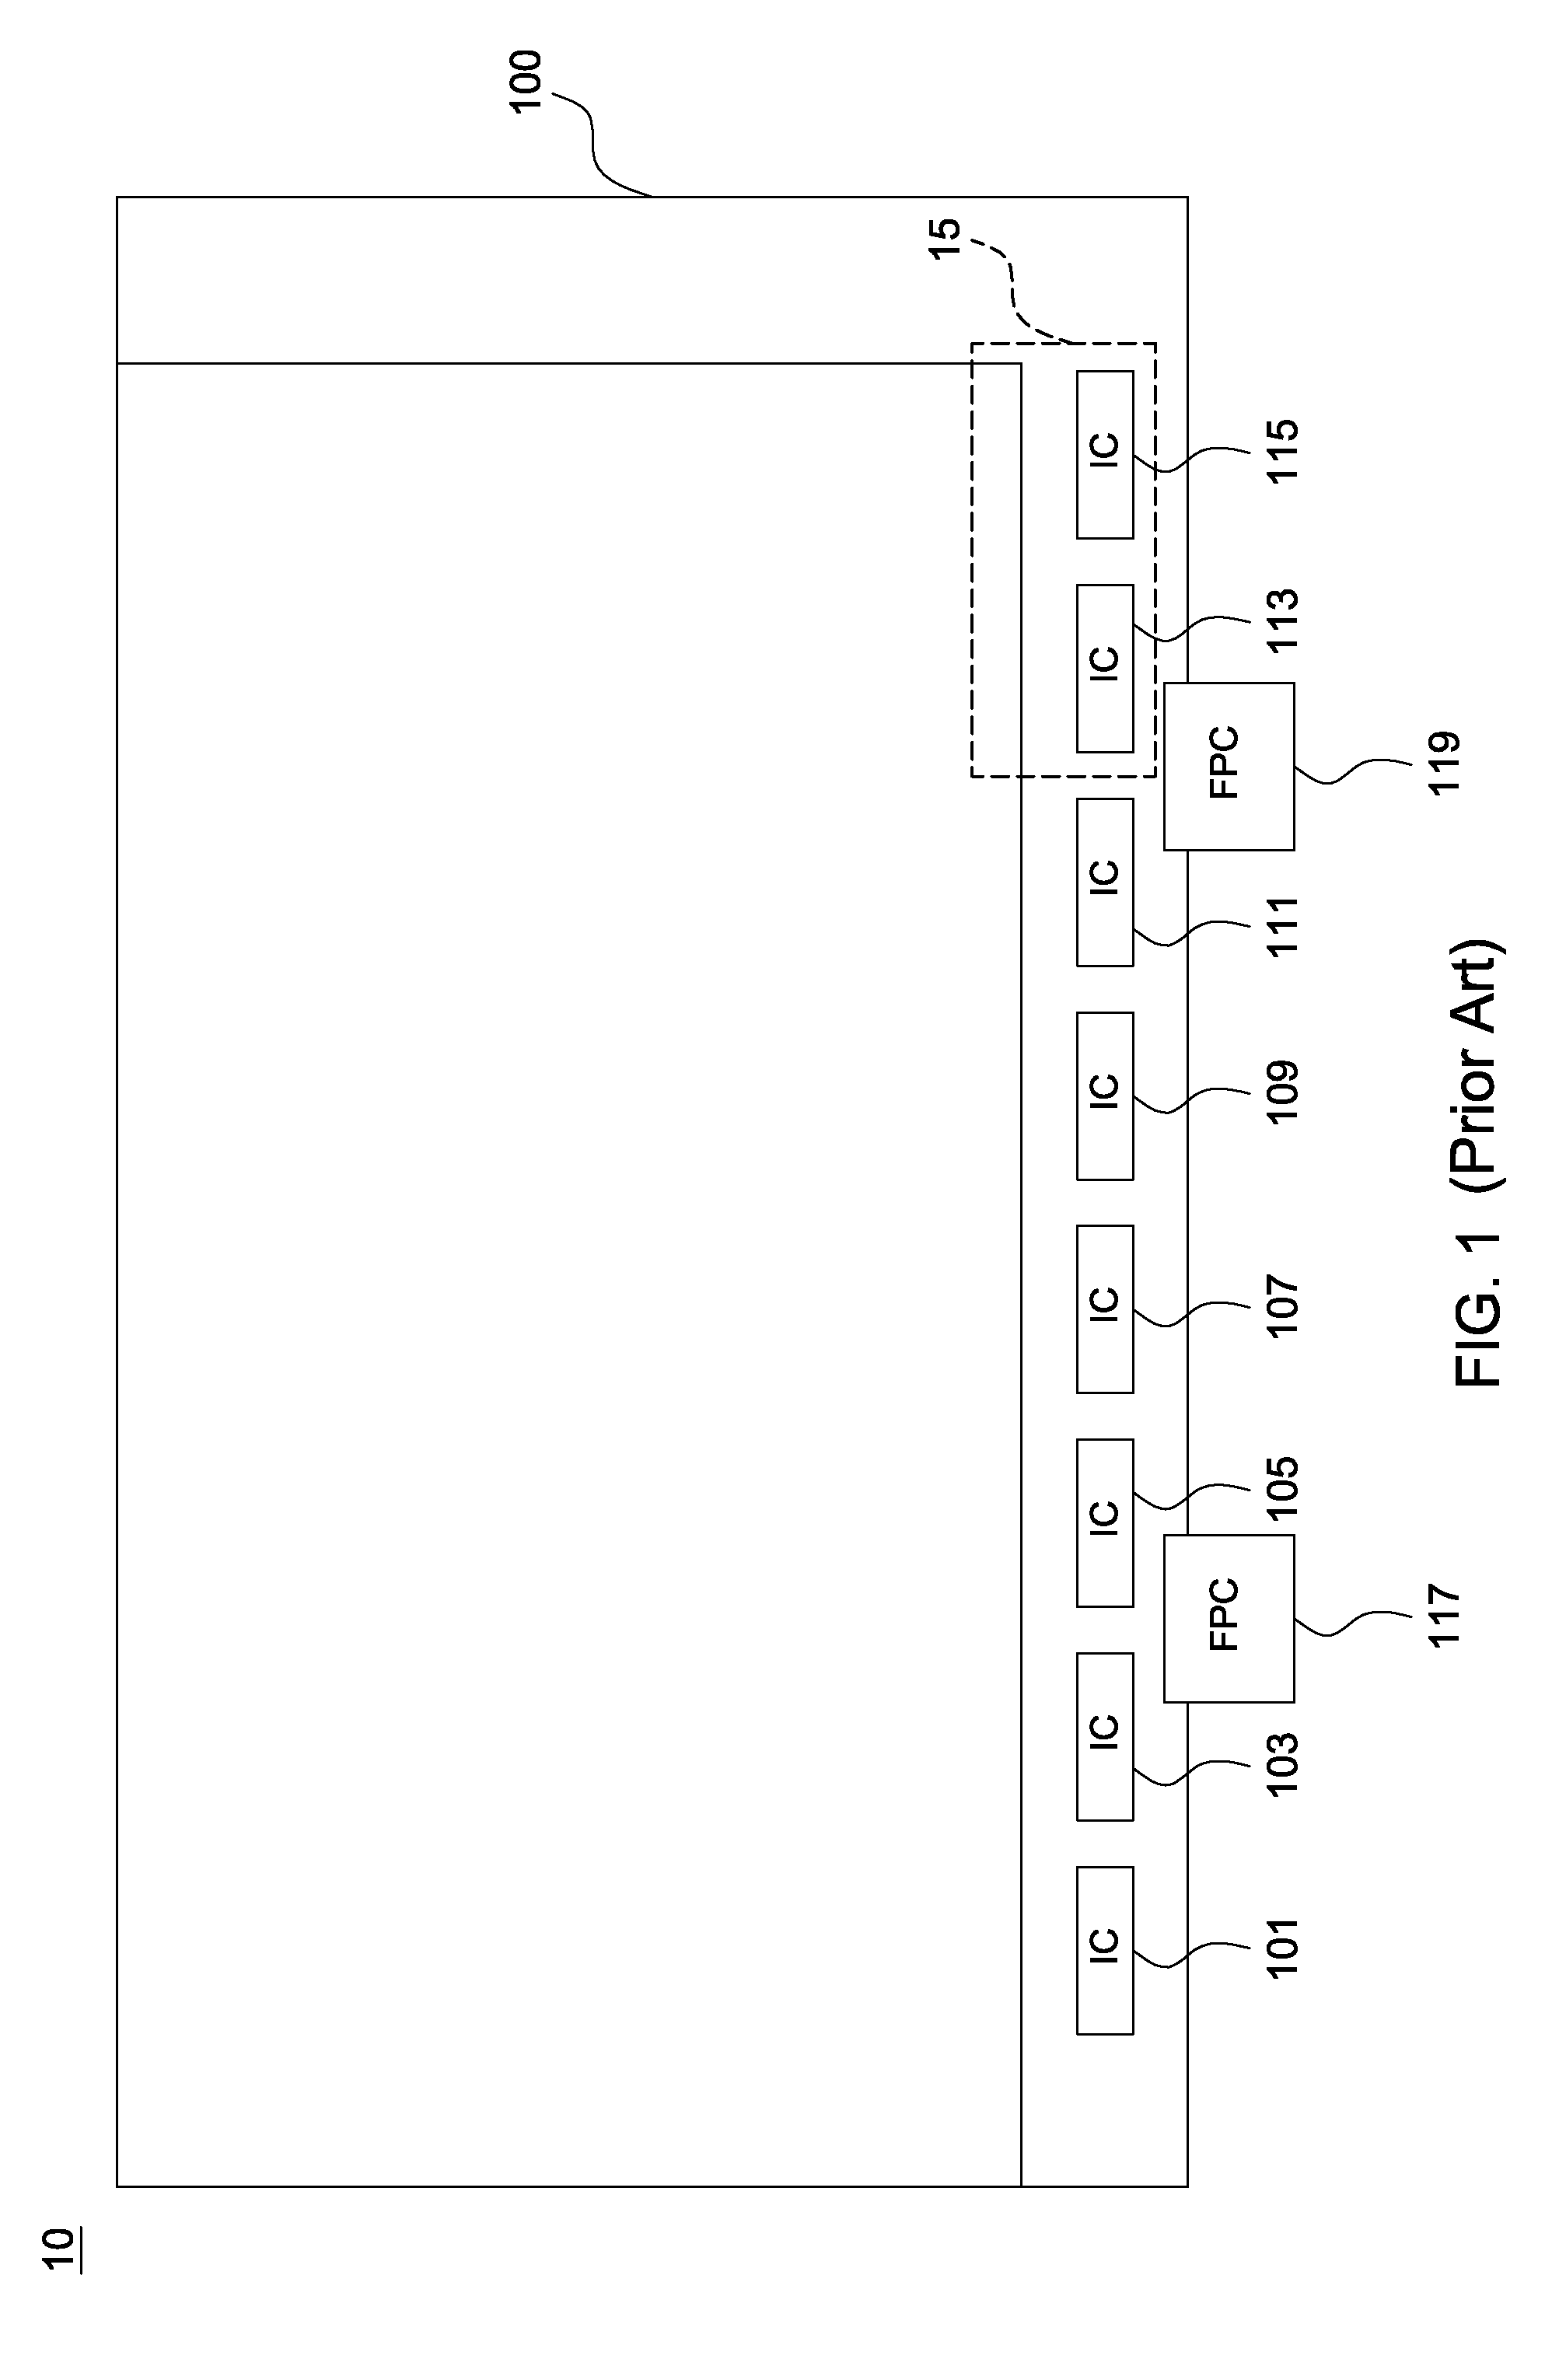 Chip-on-glass panel device